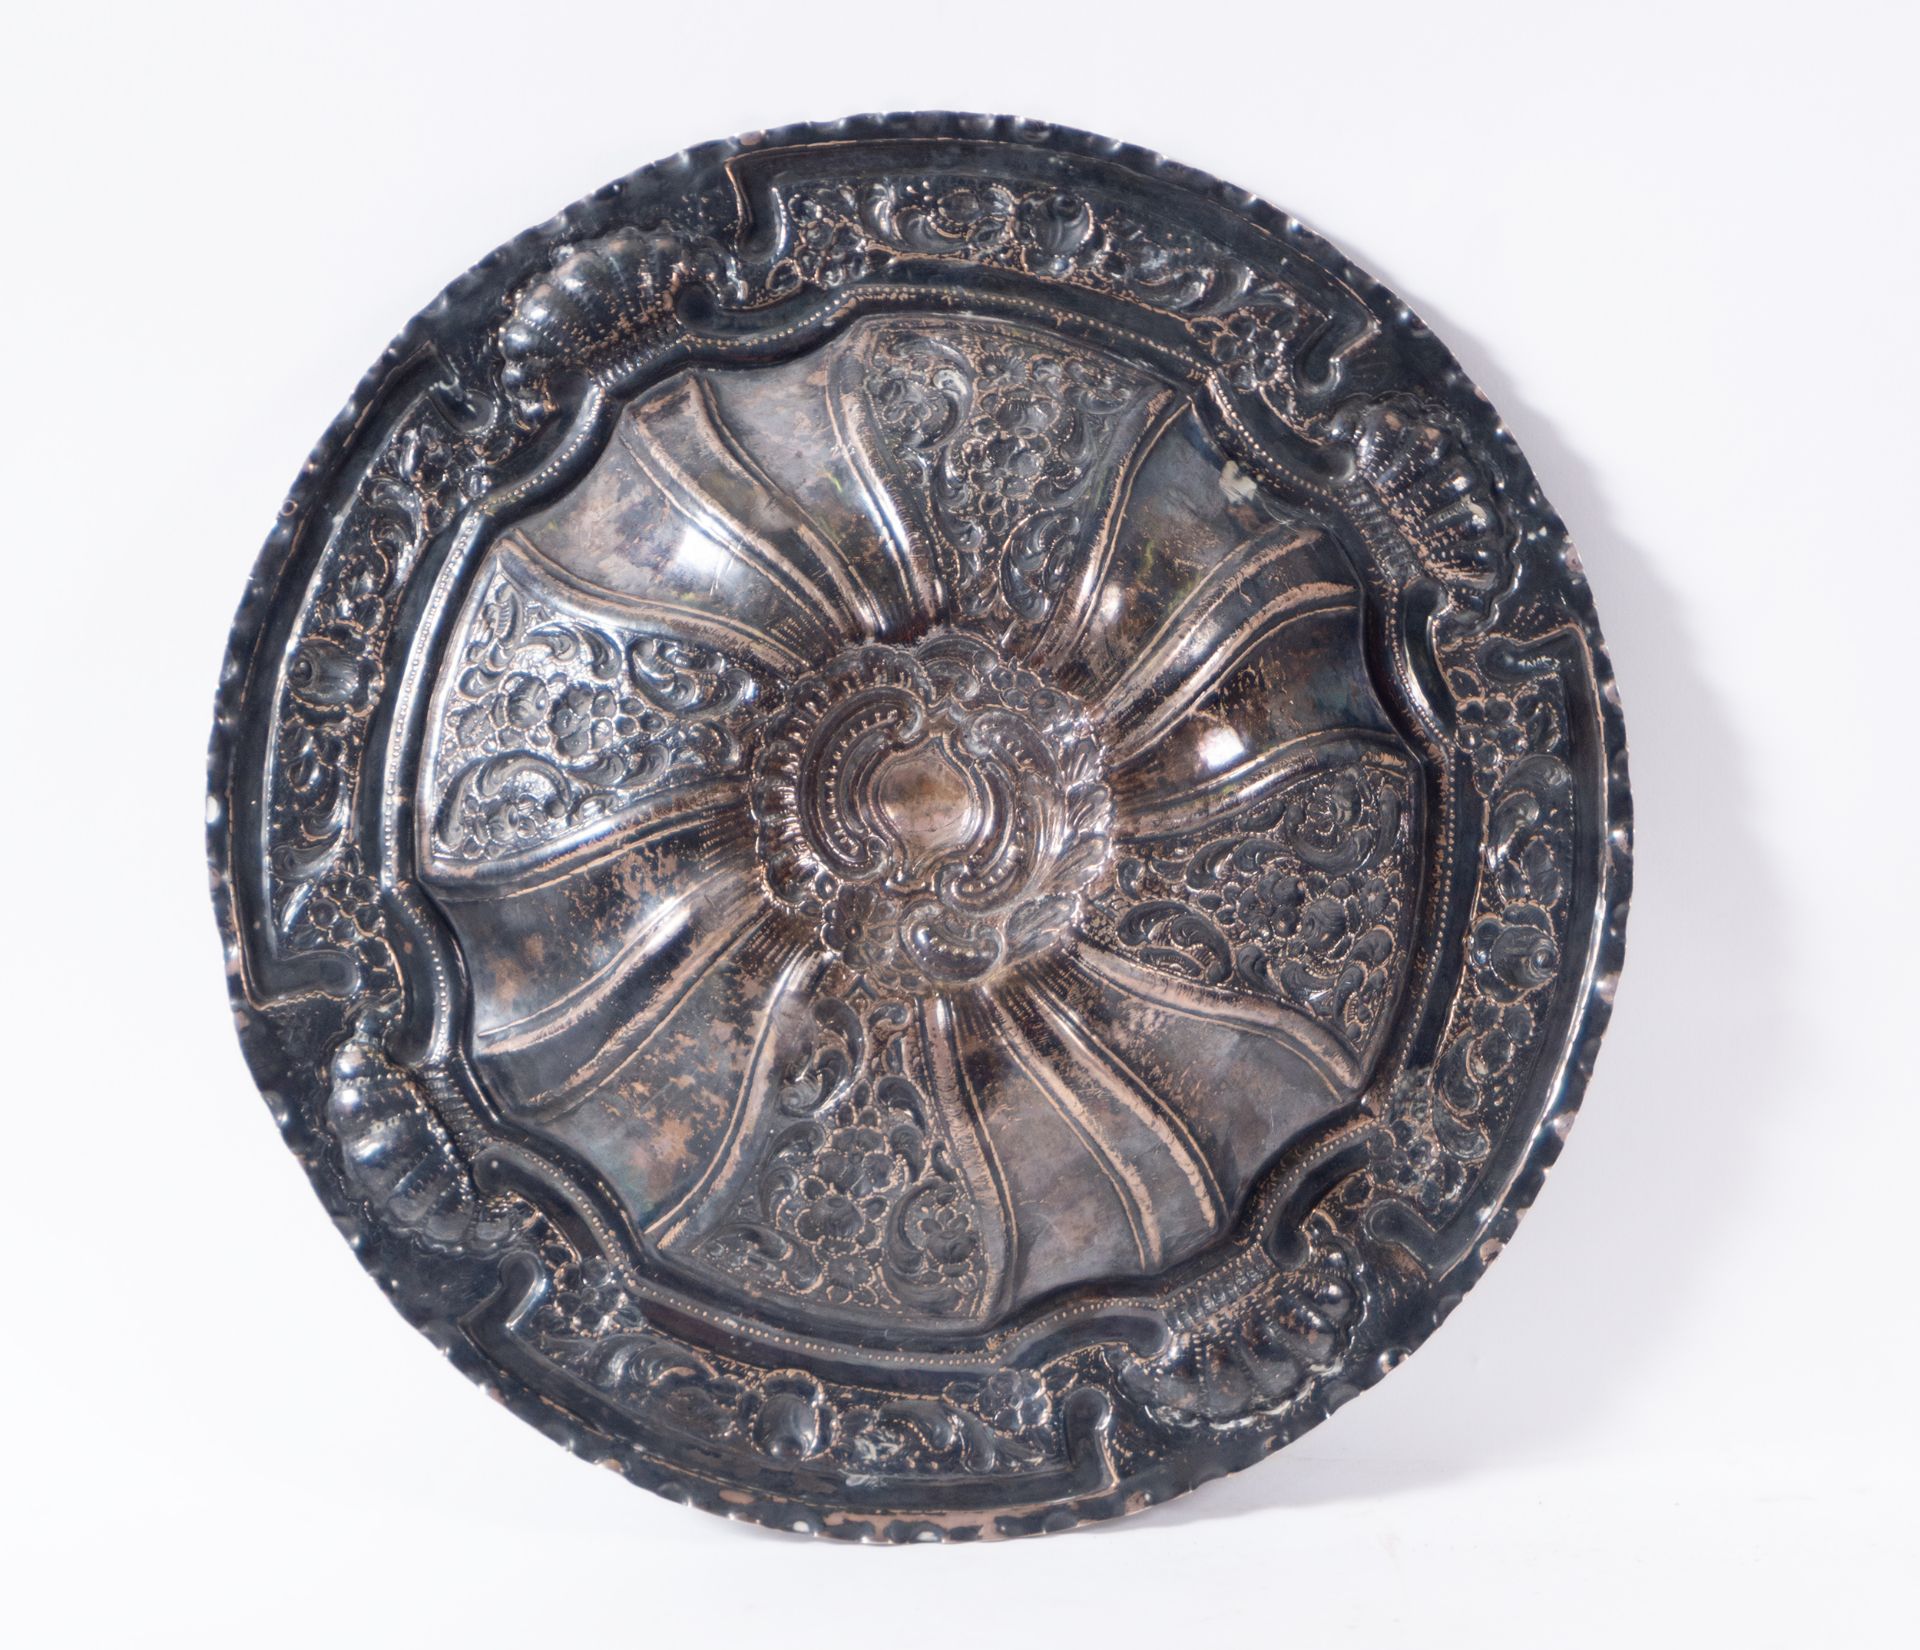 Round tray in embossed silver in the Baroque style, Spanish school of the 18th - 19th centuries - Image 2 of 2